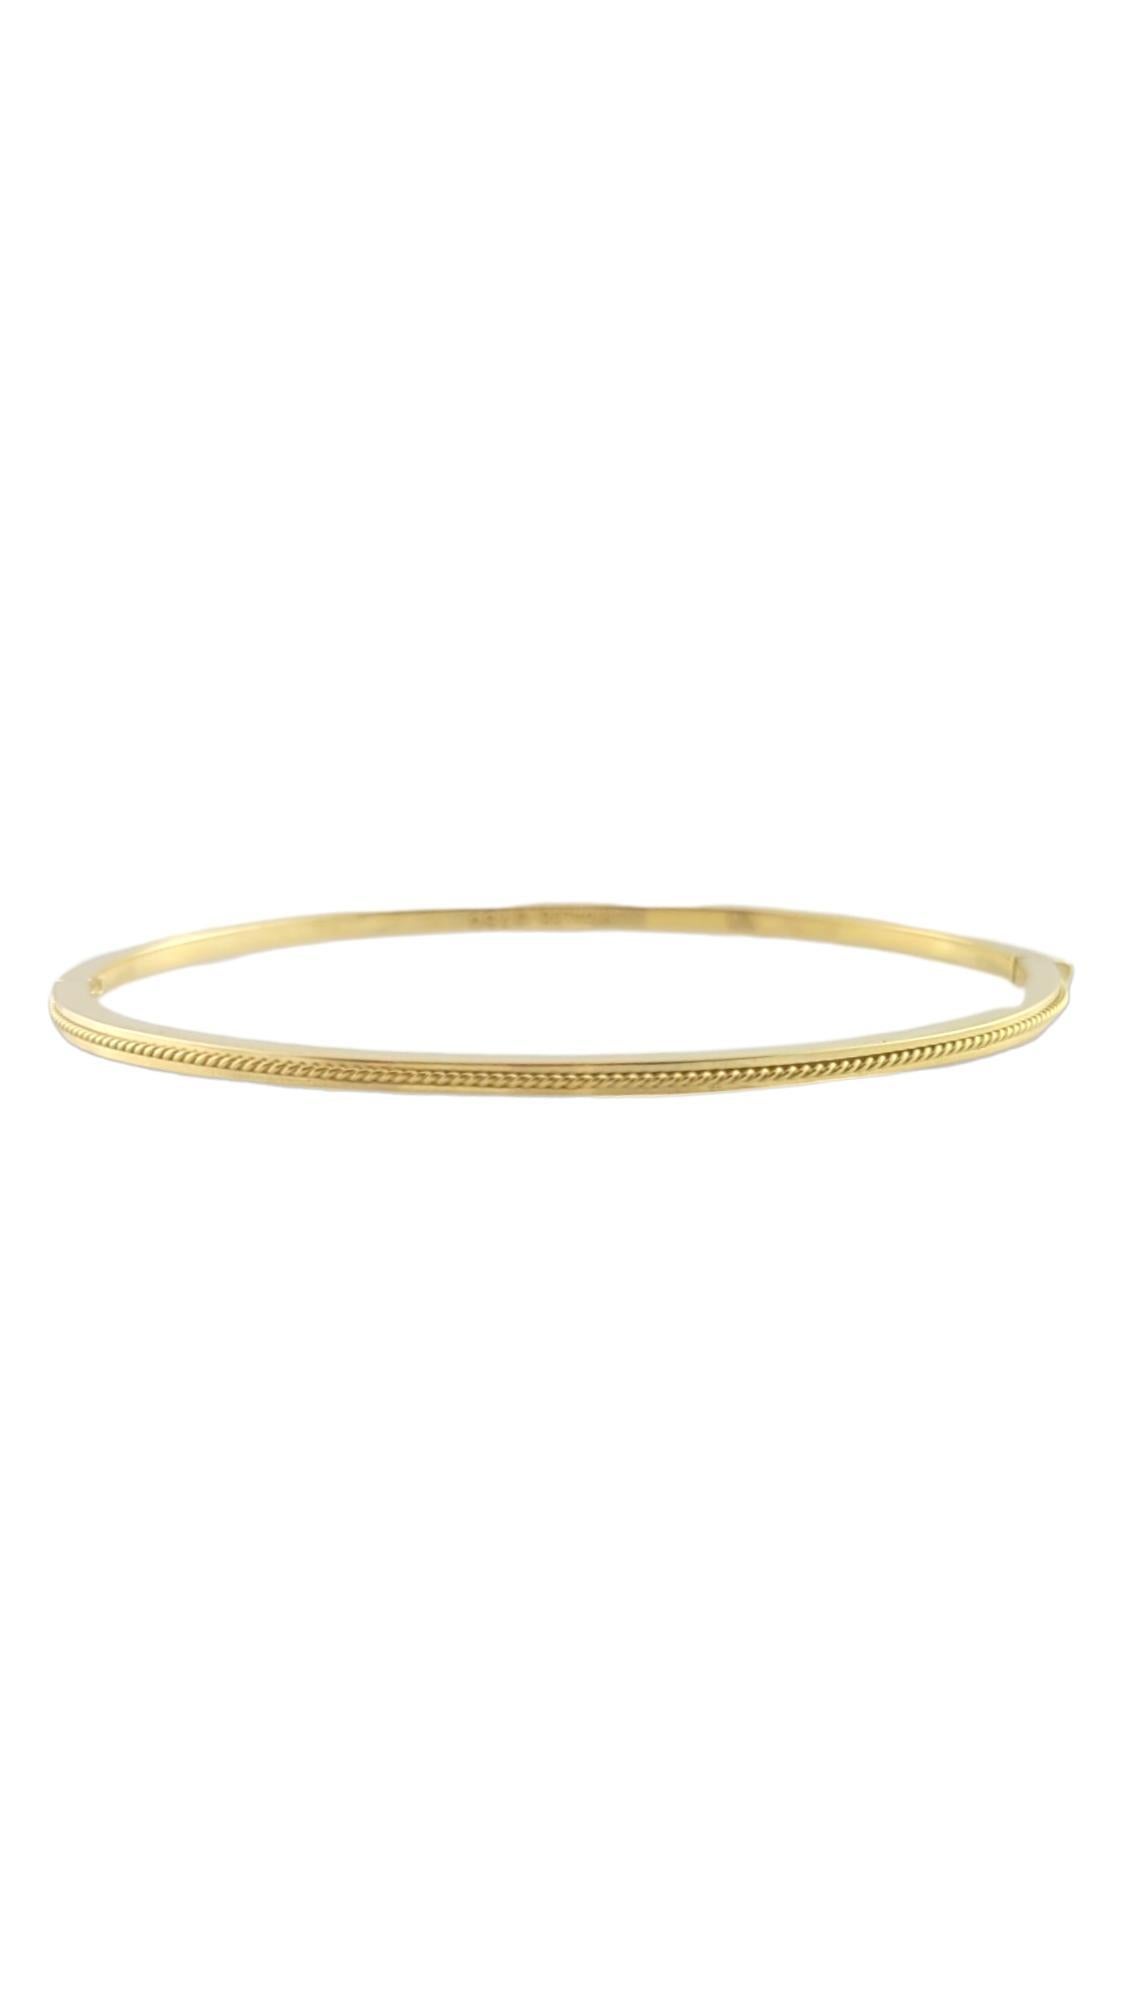 Hidalgo 18K Yellow Gold Oval Rope Accented Bangle Bracelet #16506 For Sale